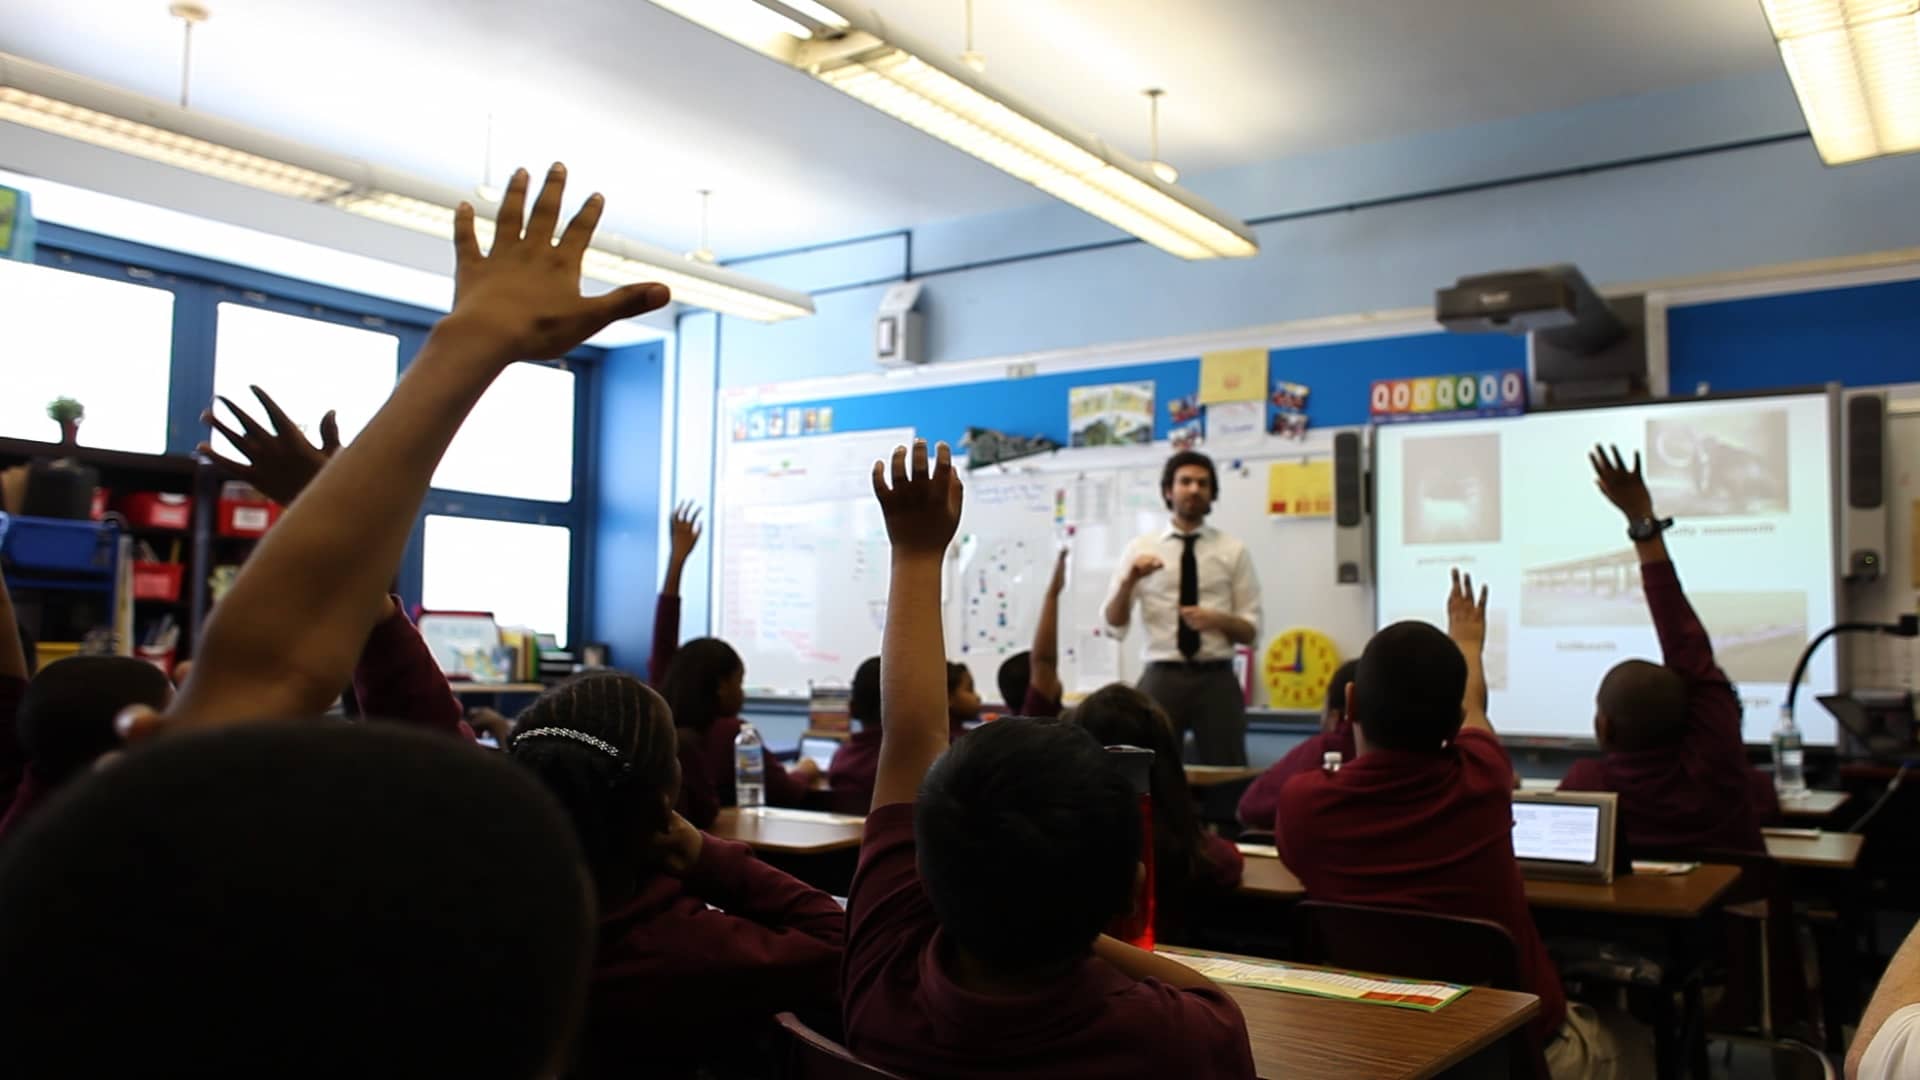 A teacher is instructing a classroom of students with their hands raised.